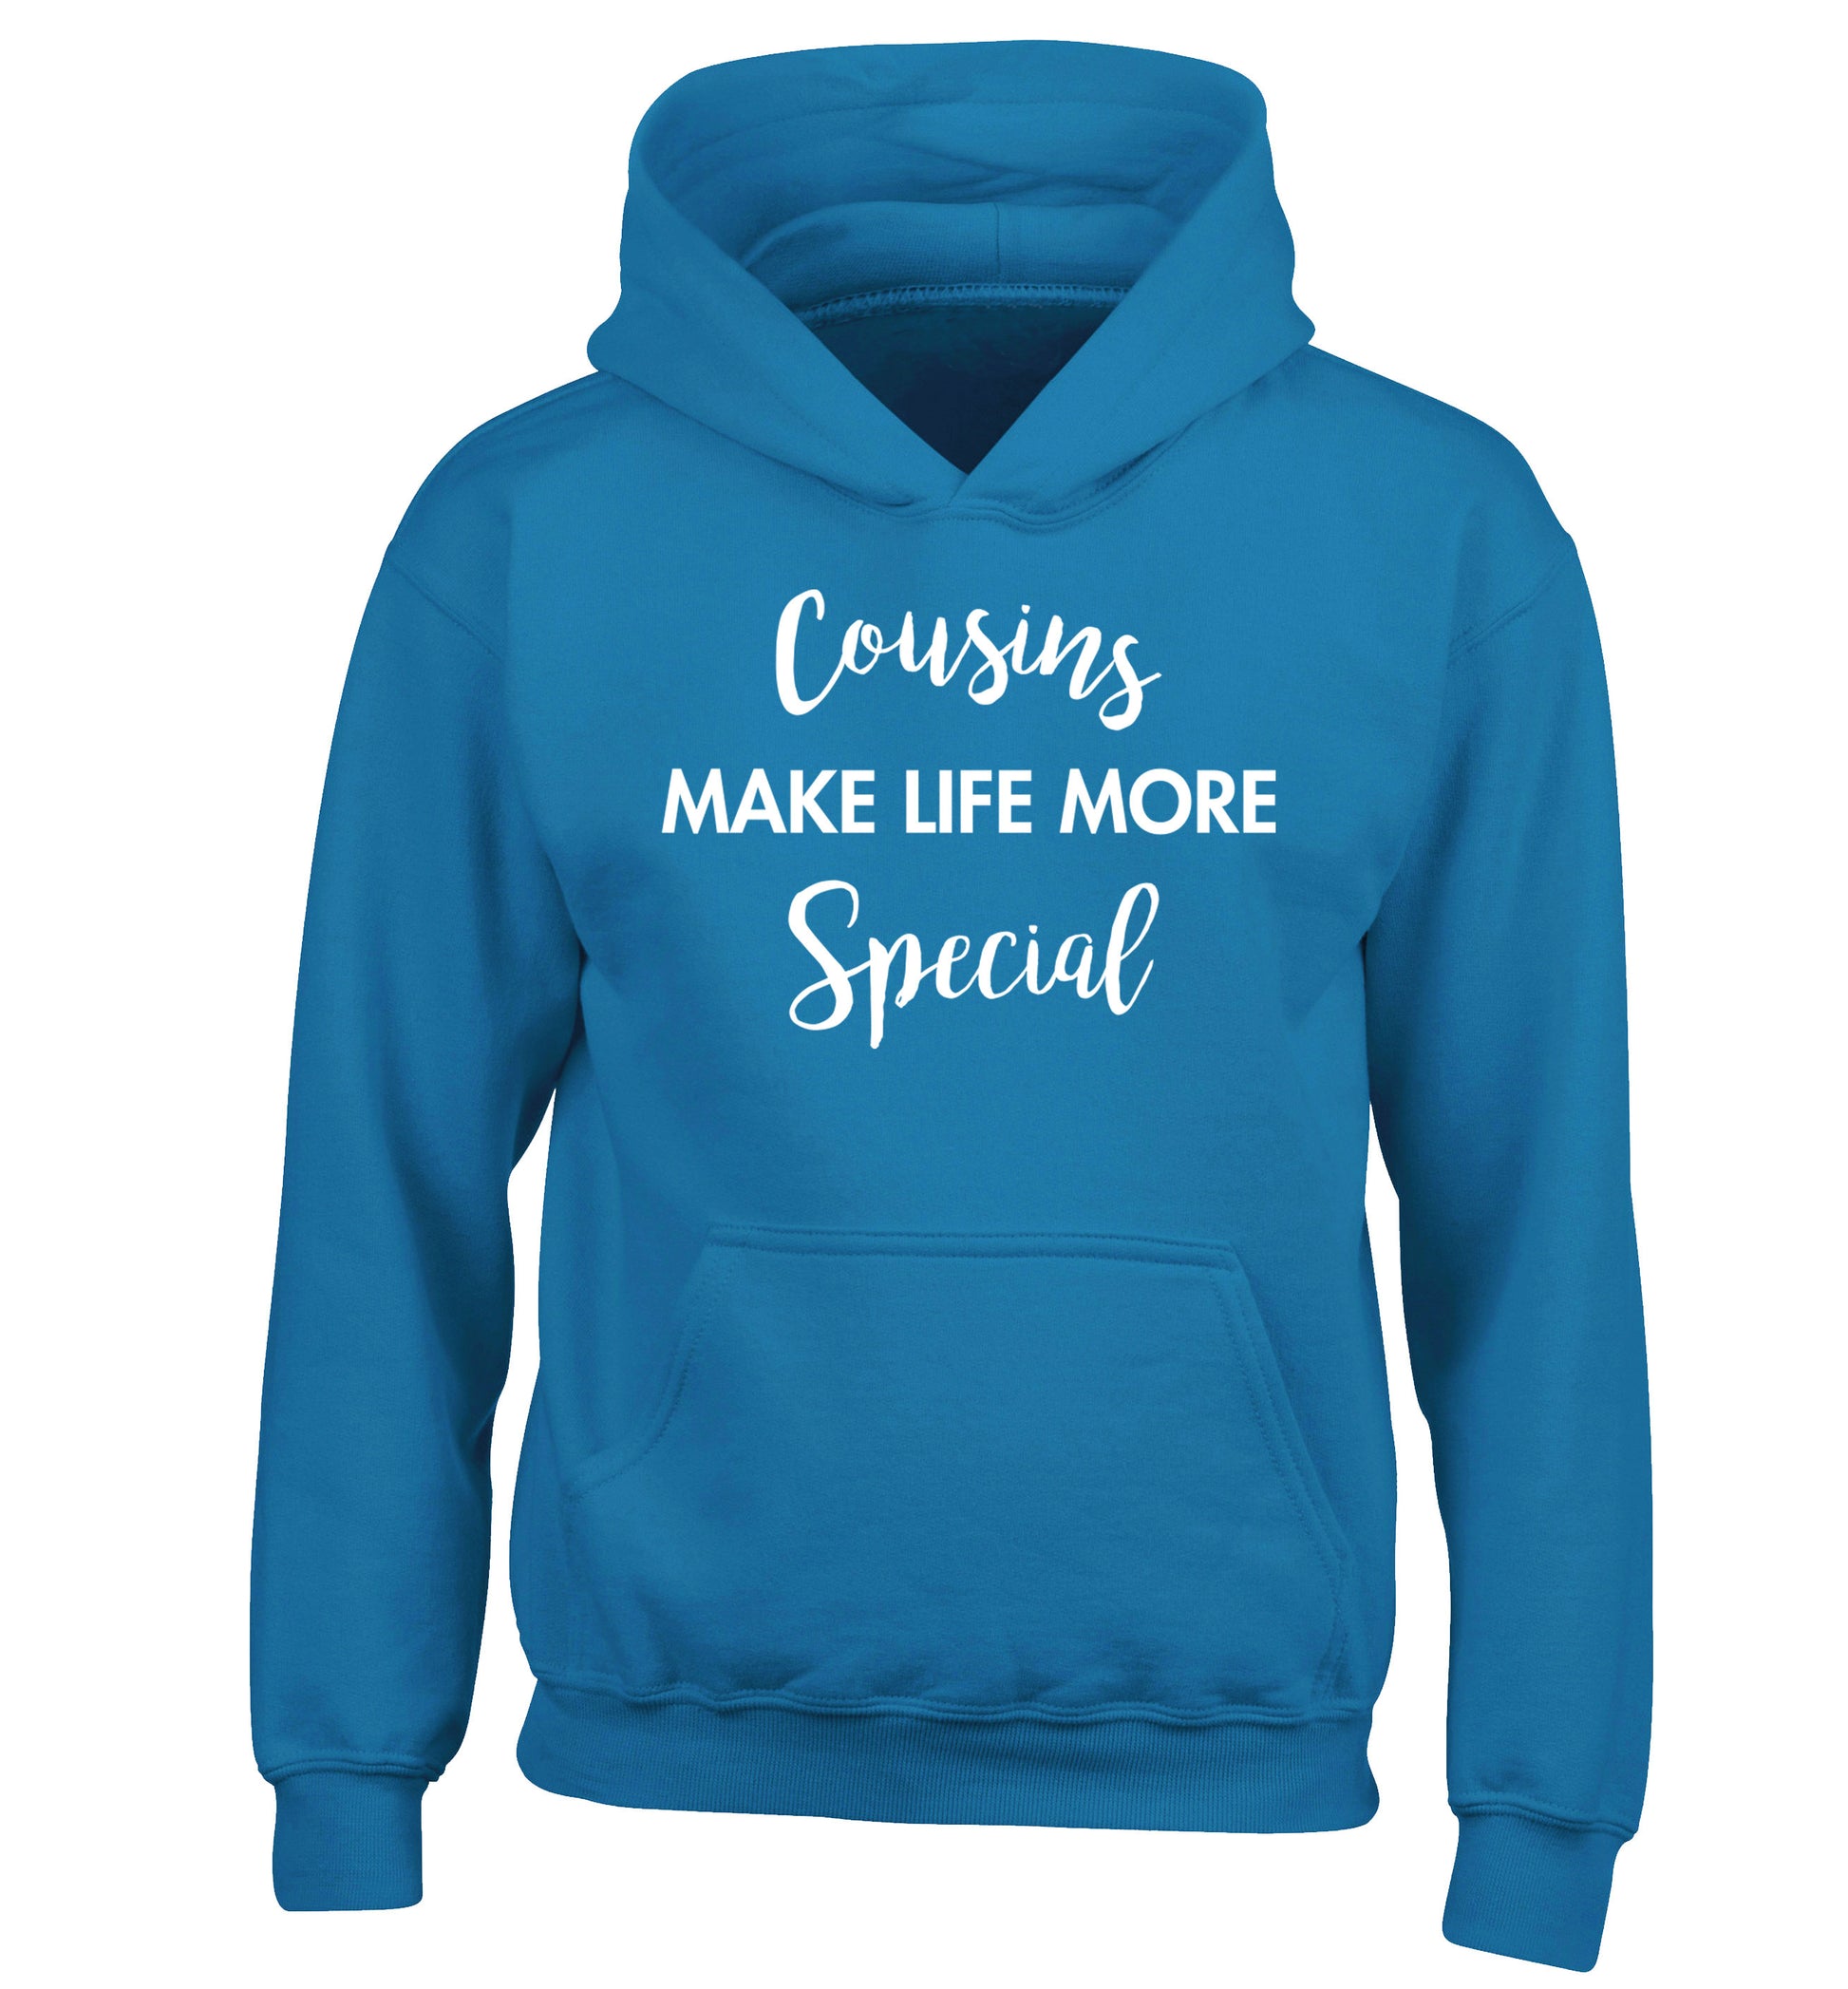 Cousins make life more special children's blue hoodie 12-14 Years